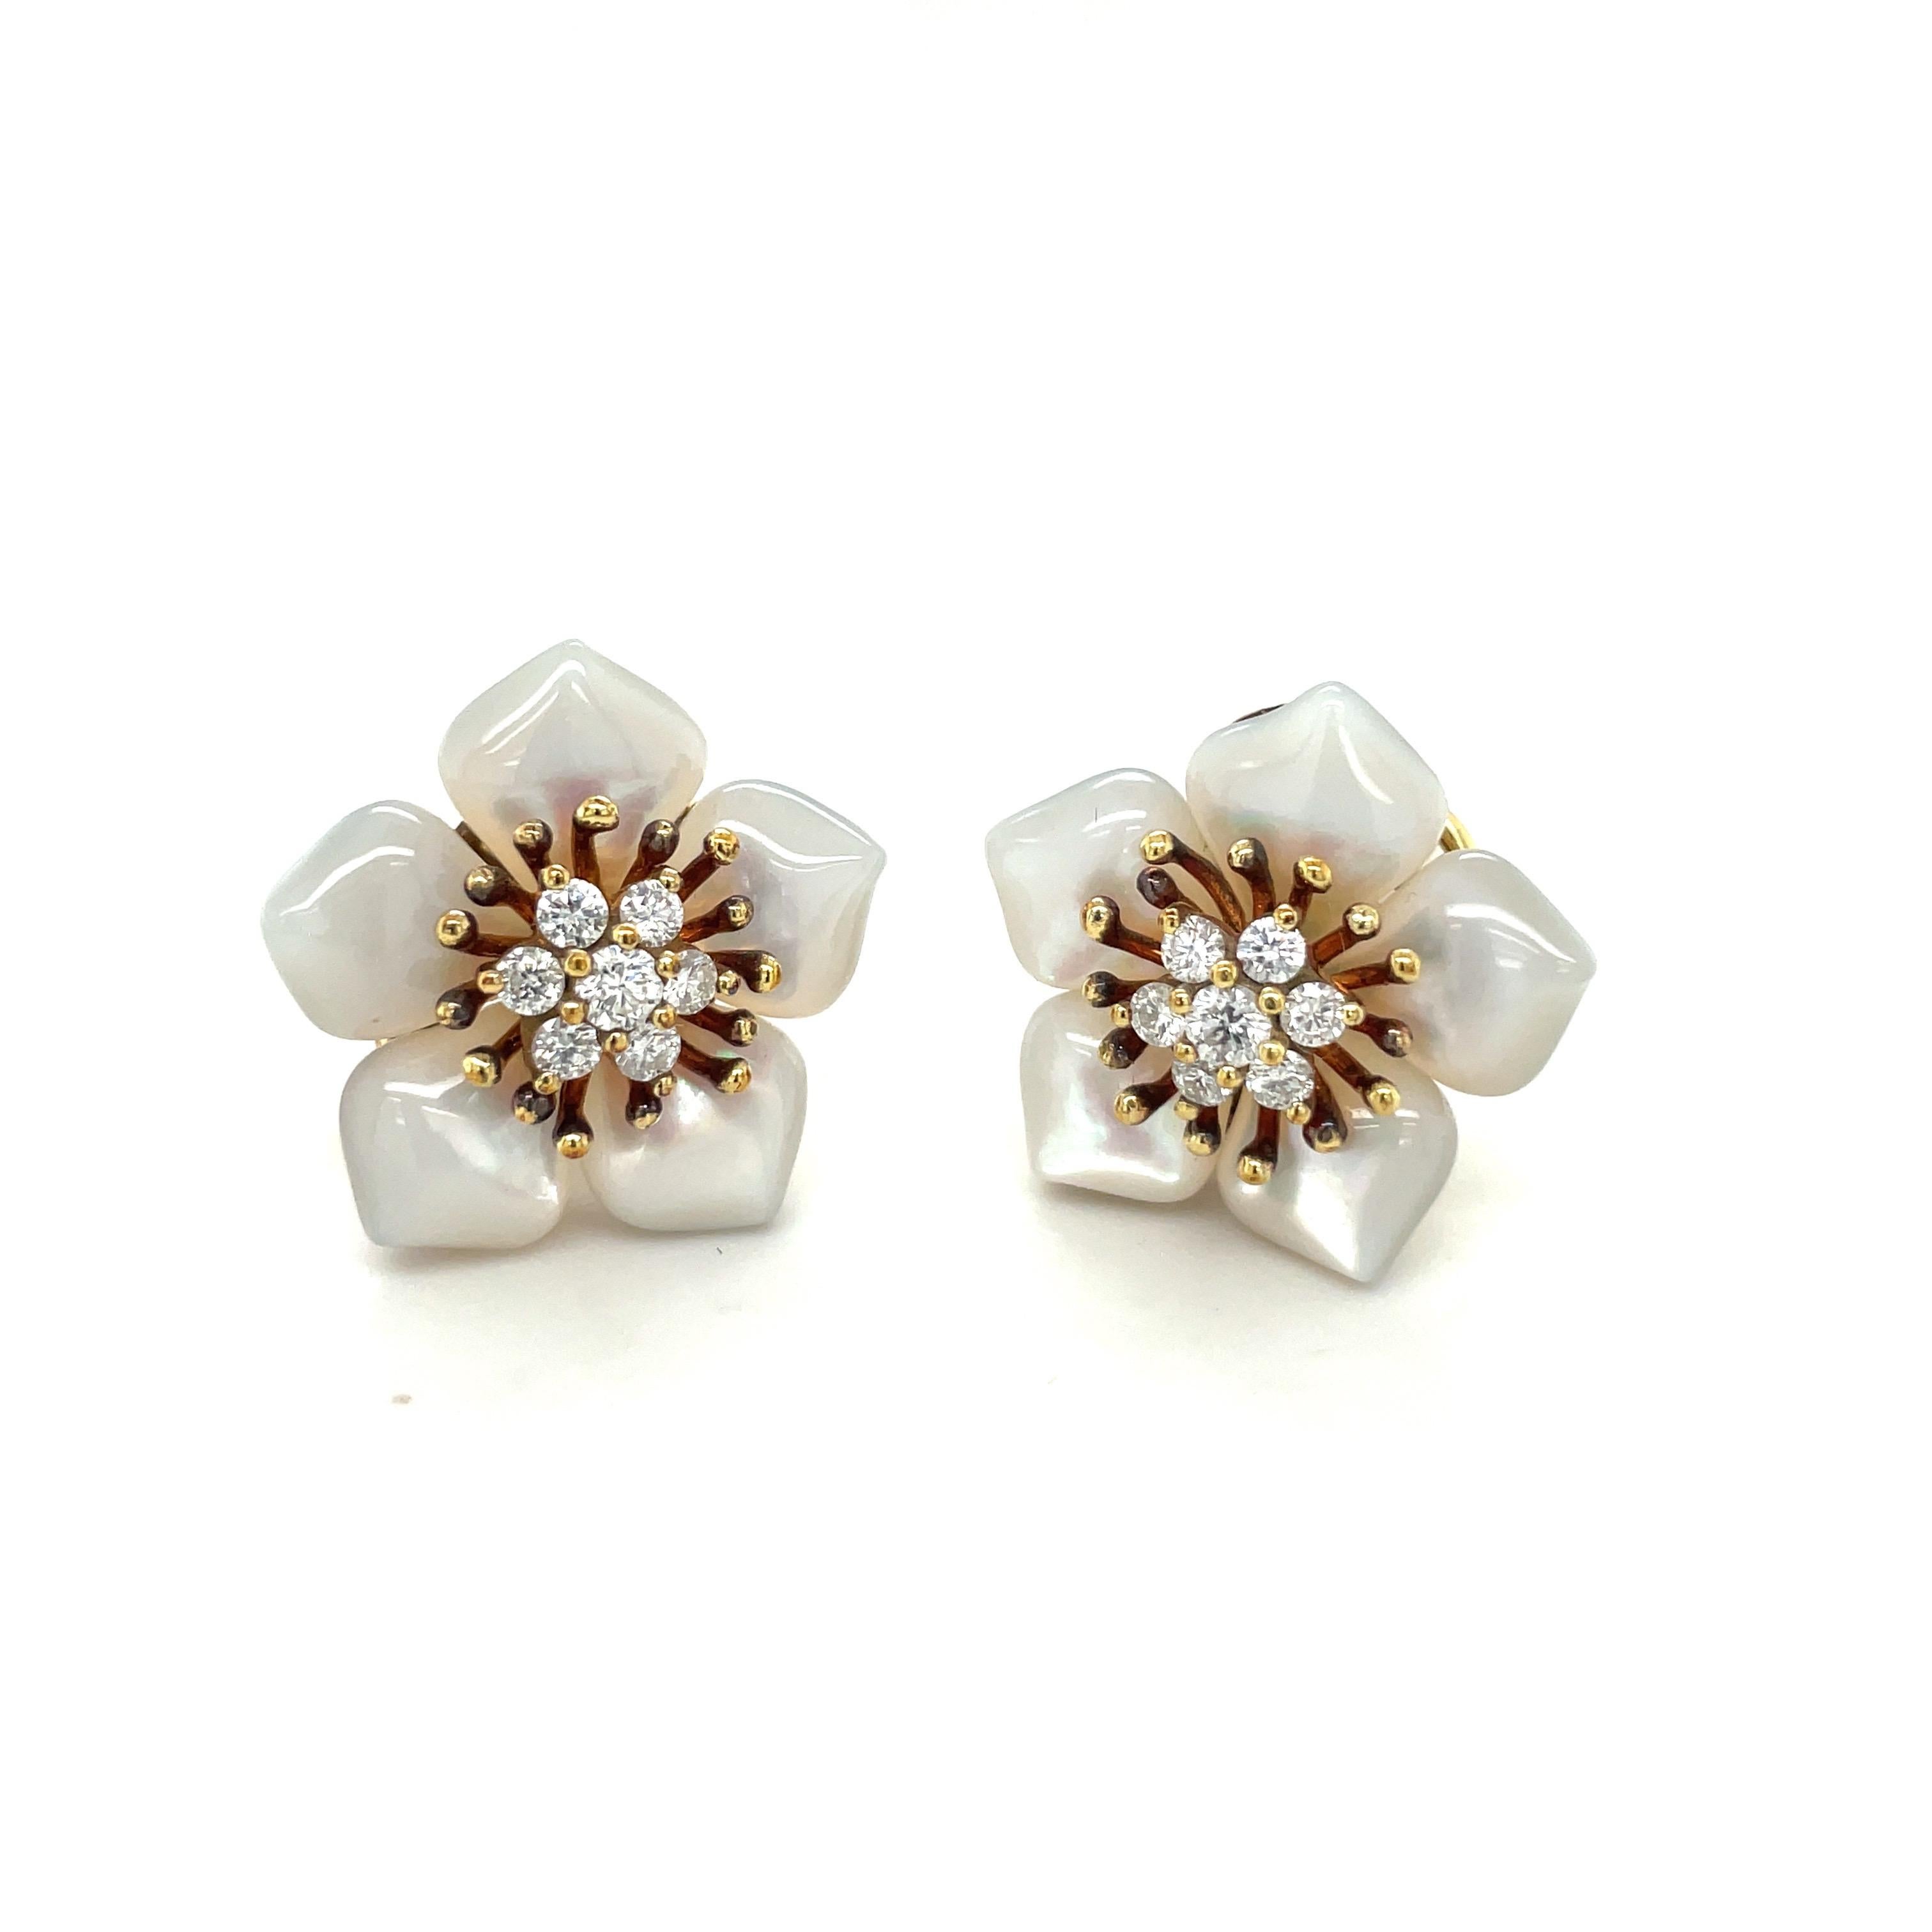 18 karat yellow gold flower earrings by Asch Grossbardt. The petals are set with beautifully shaped mother of pearl. The center of the flowers are set with a total of 14 round brilliant diamonds totaling 0.80carats. The 7/8